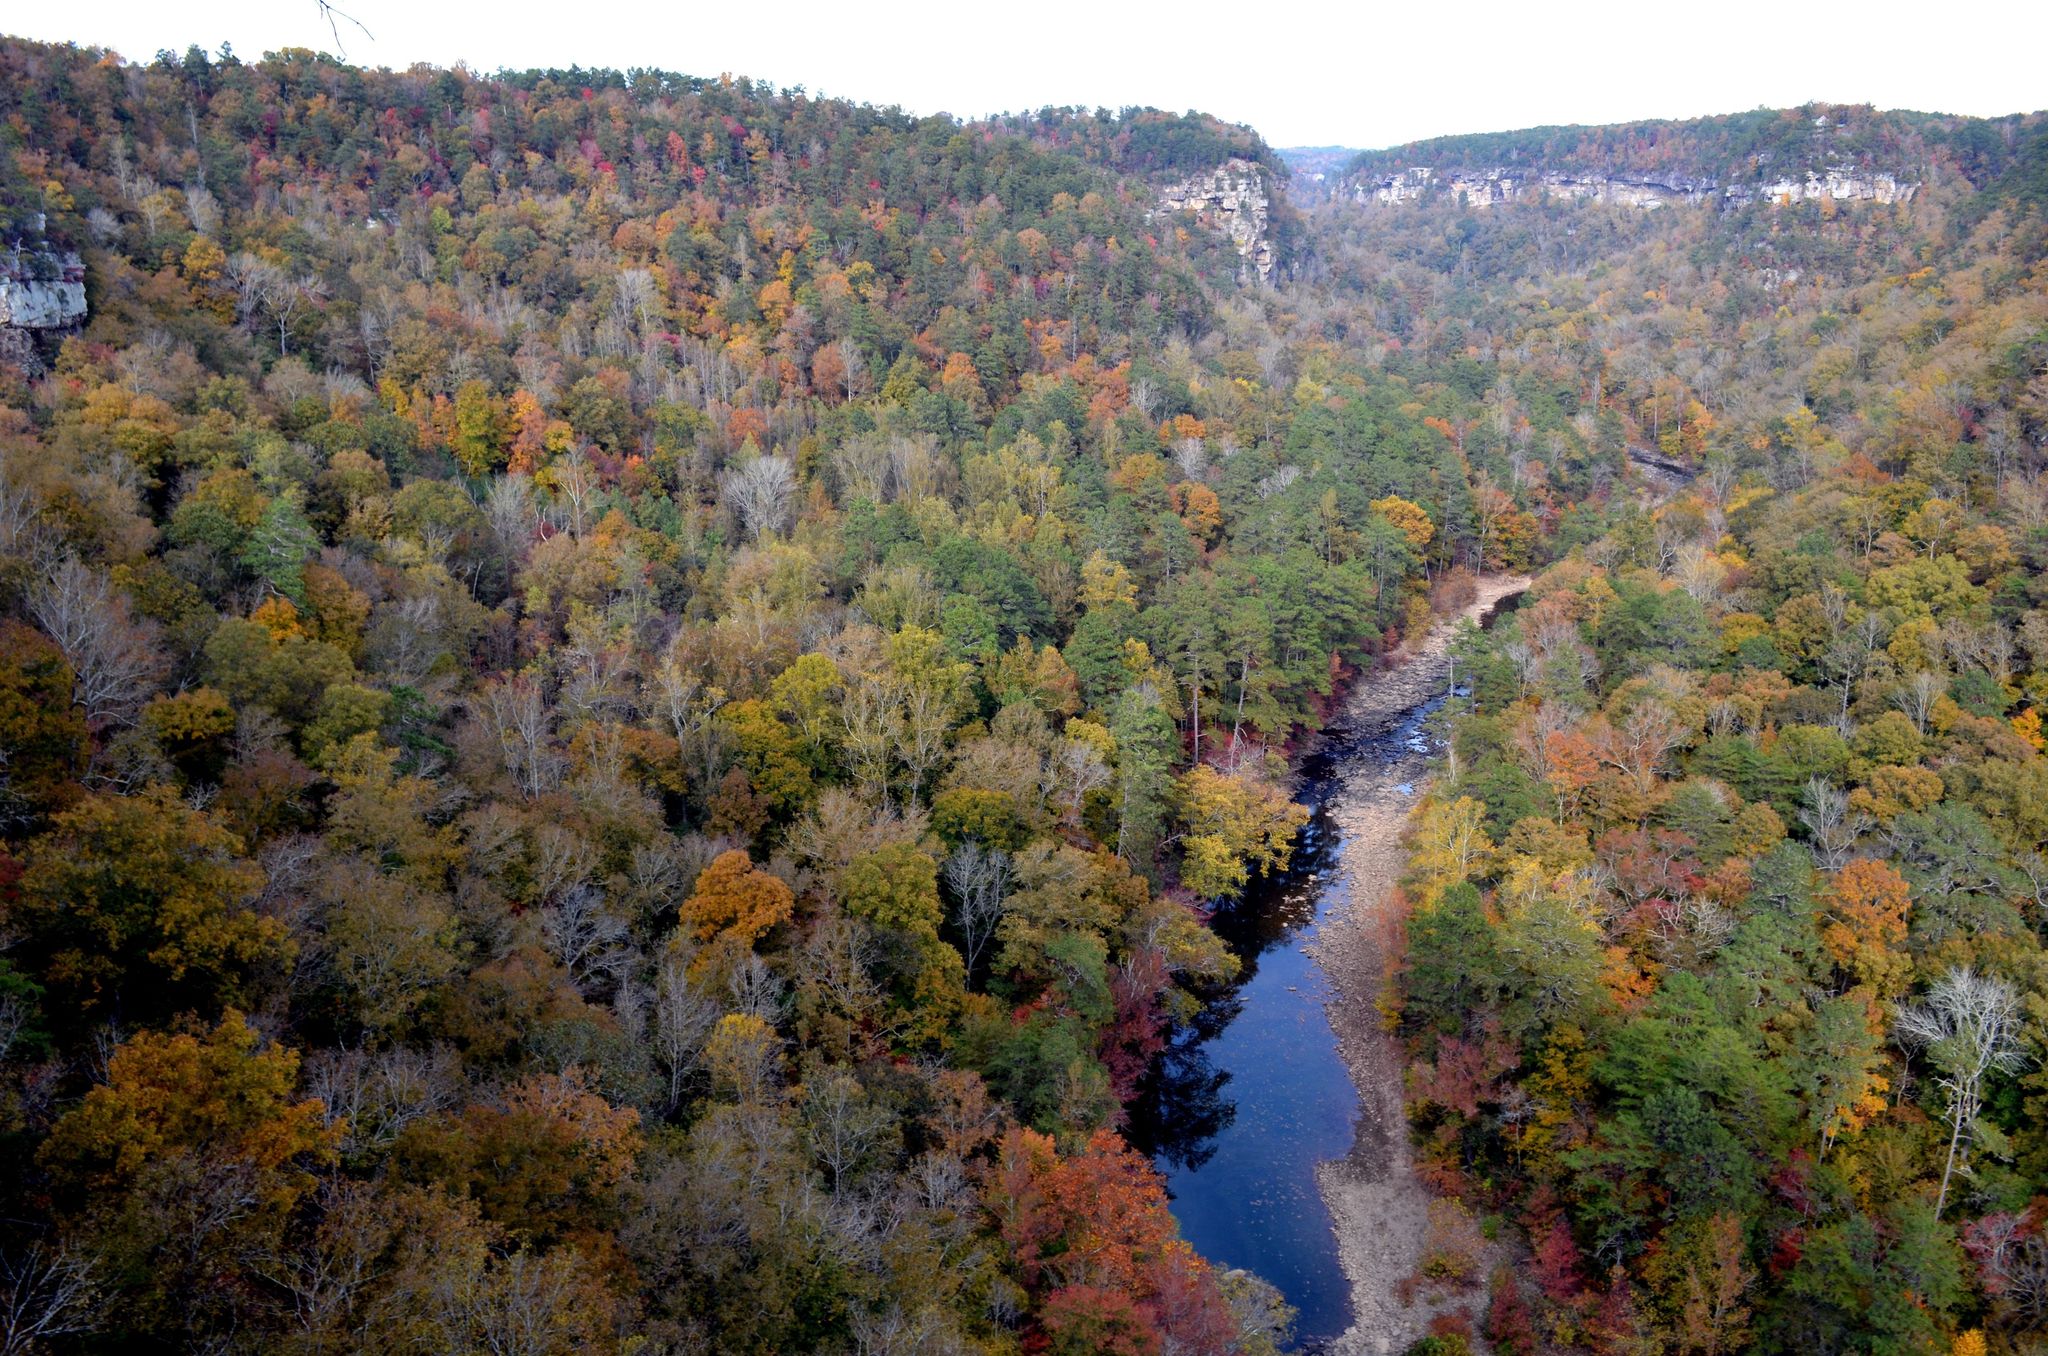 Little River Canyon in the Fall